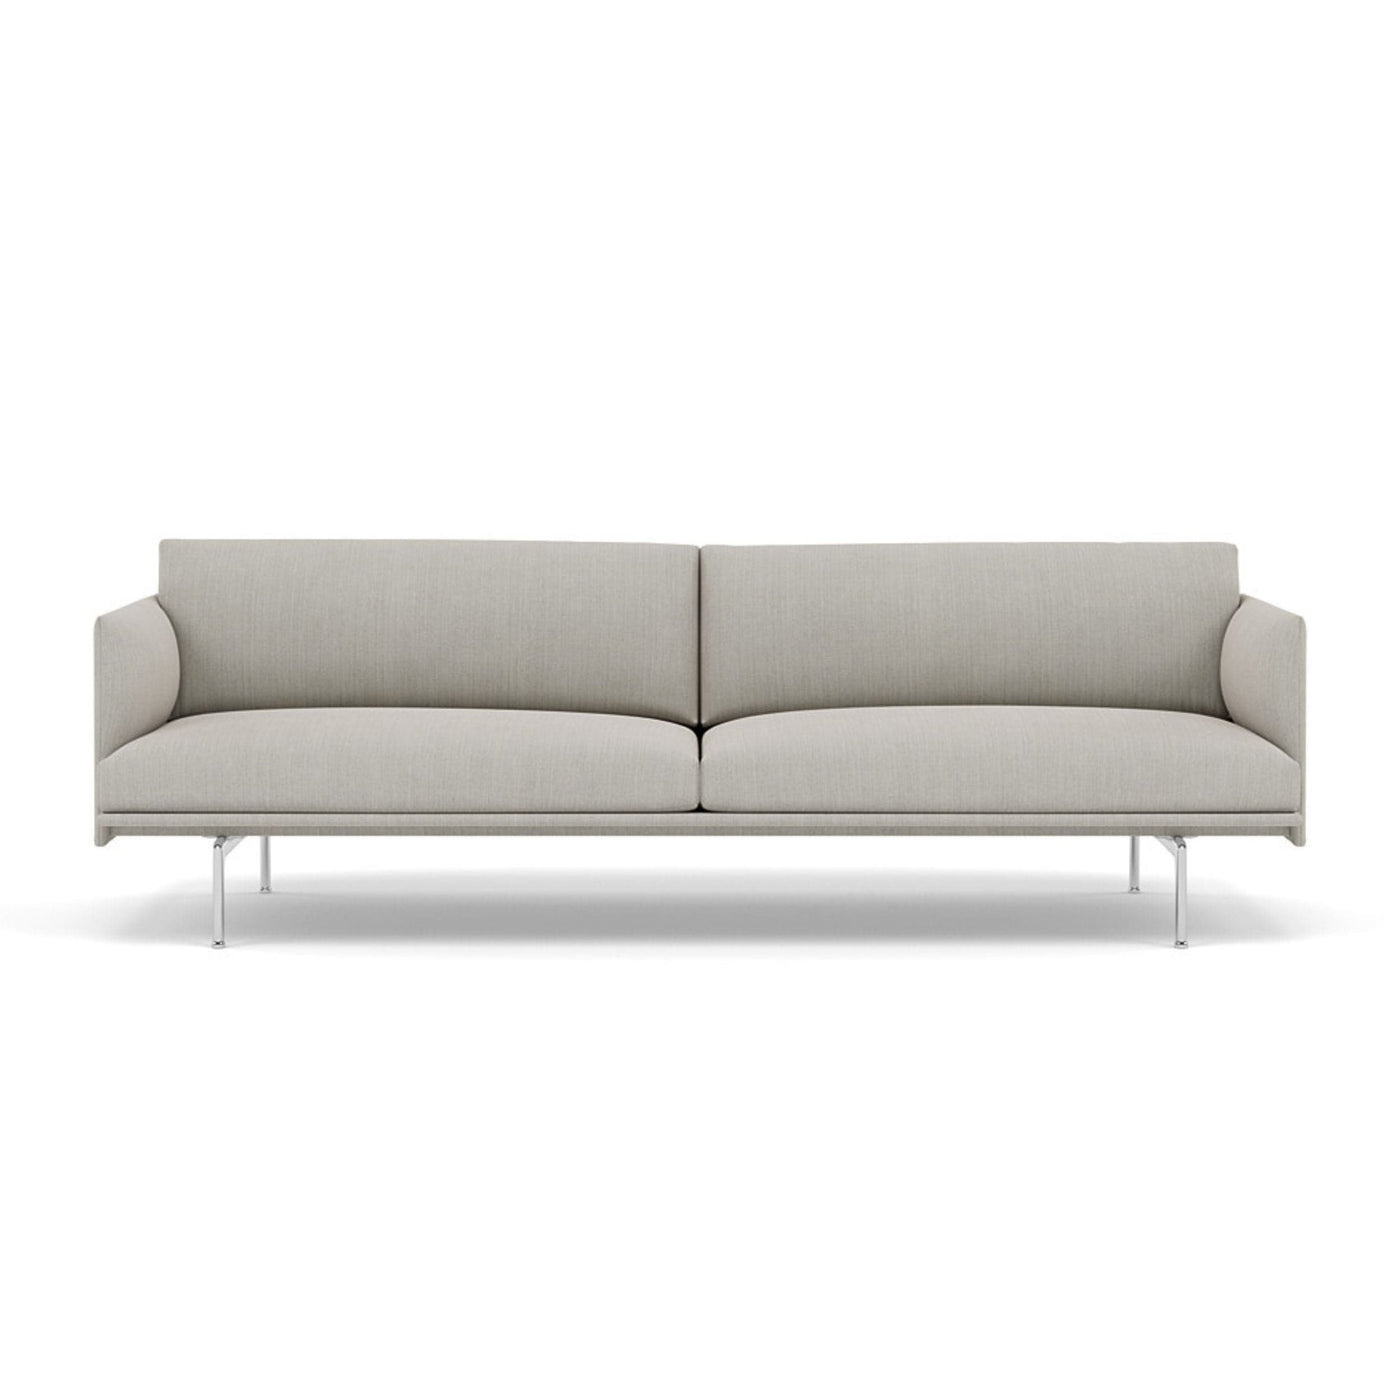 Muuto Outline Studio Sofa 220 polished aluminium legs. Made to order from someday designs. #colour_fiord-201